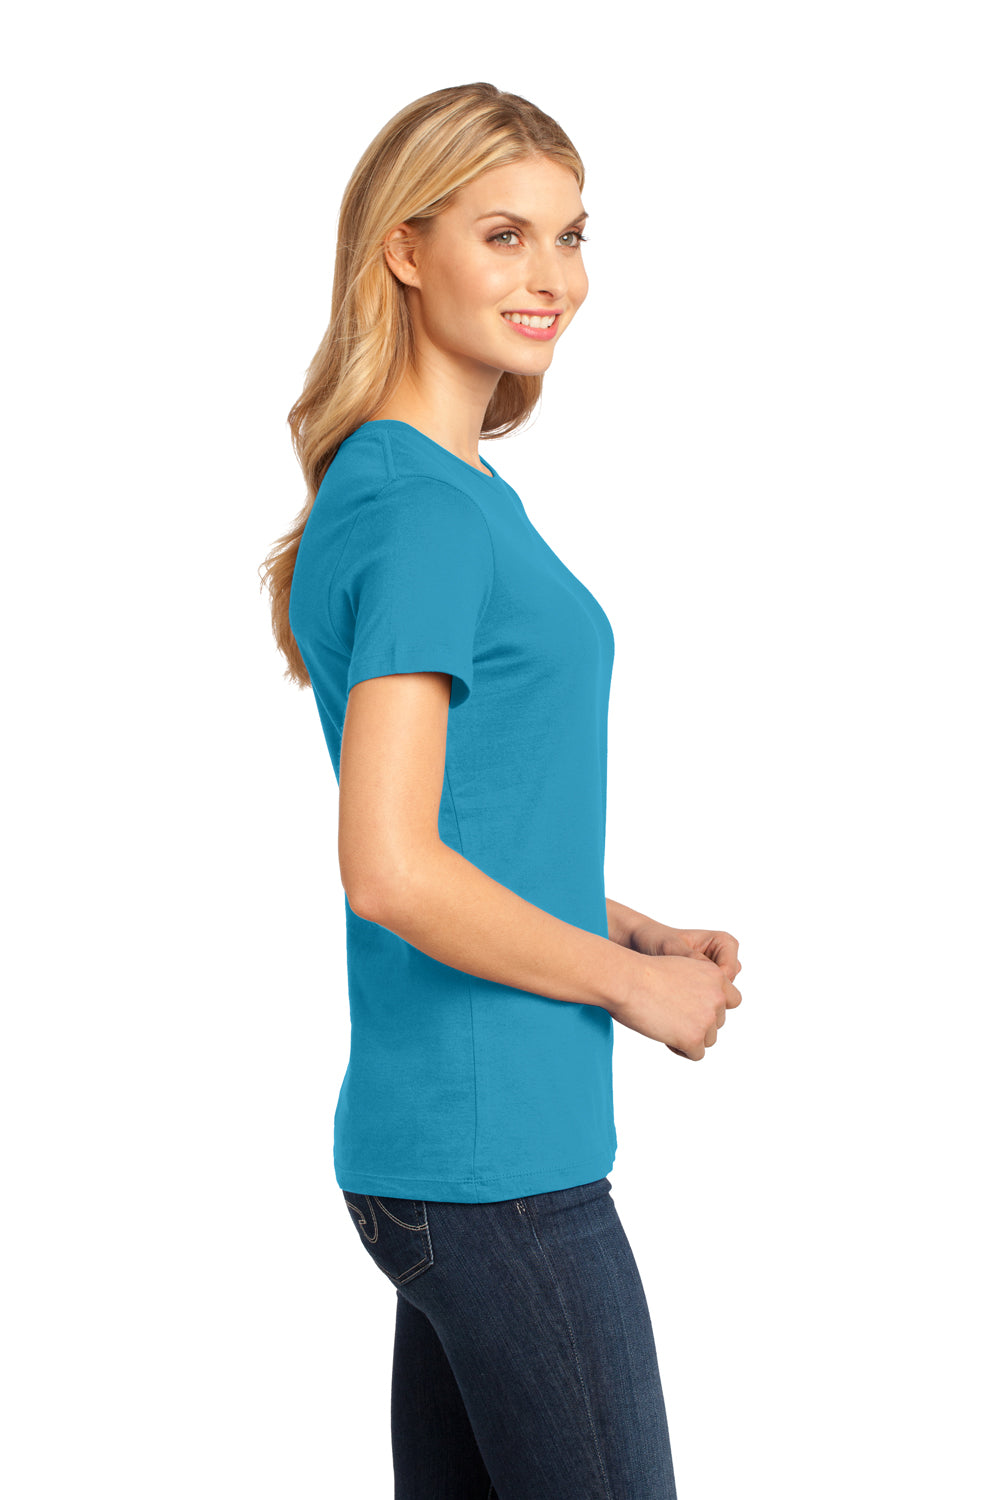 District DM104L Womens Perfect Weight Short Sleeve Crewneck T-Shirt Turquoise Blue Side